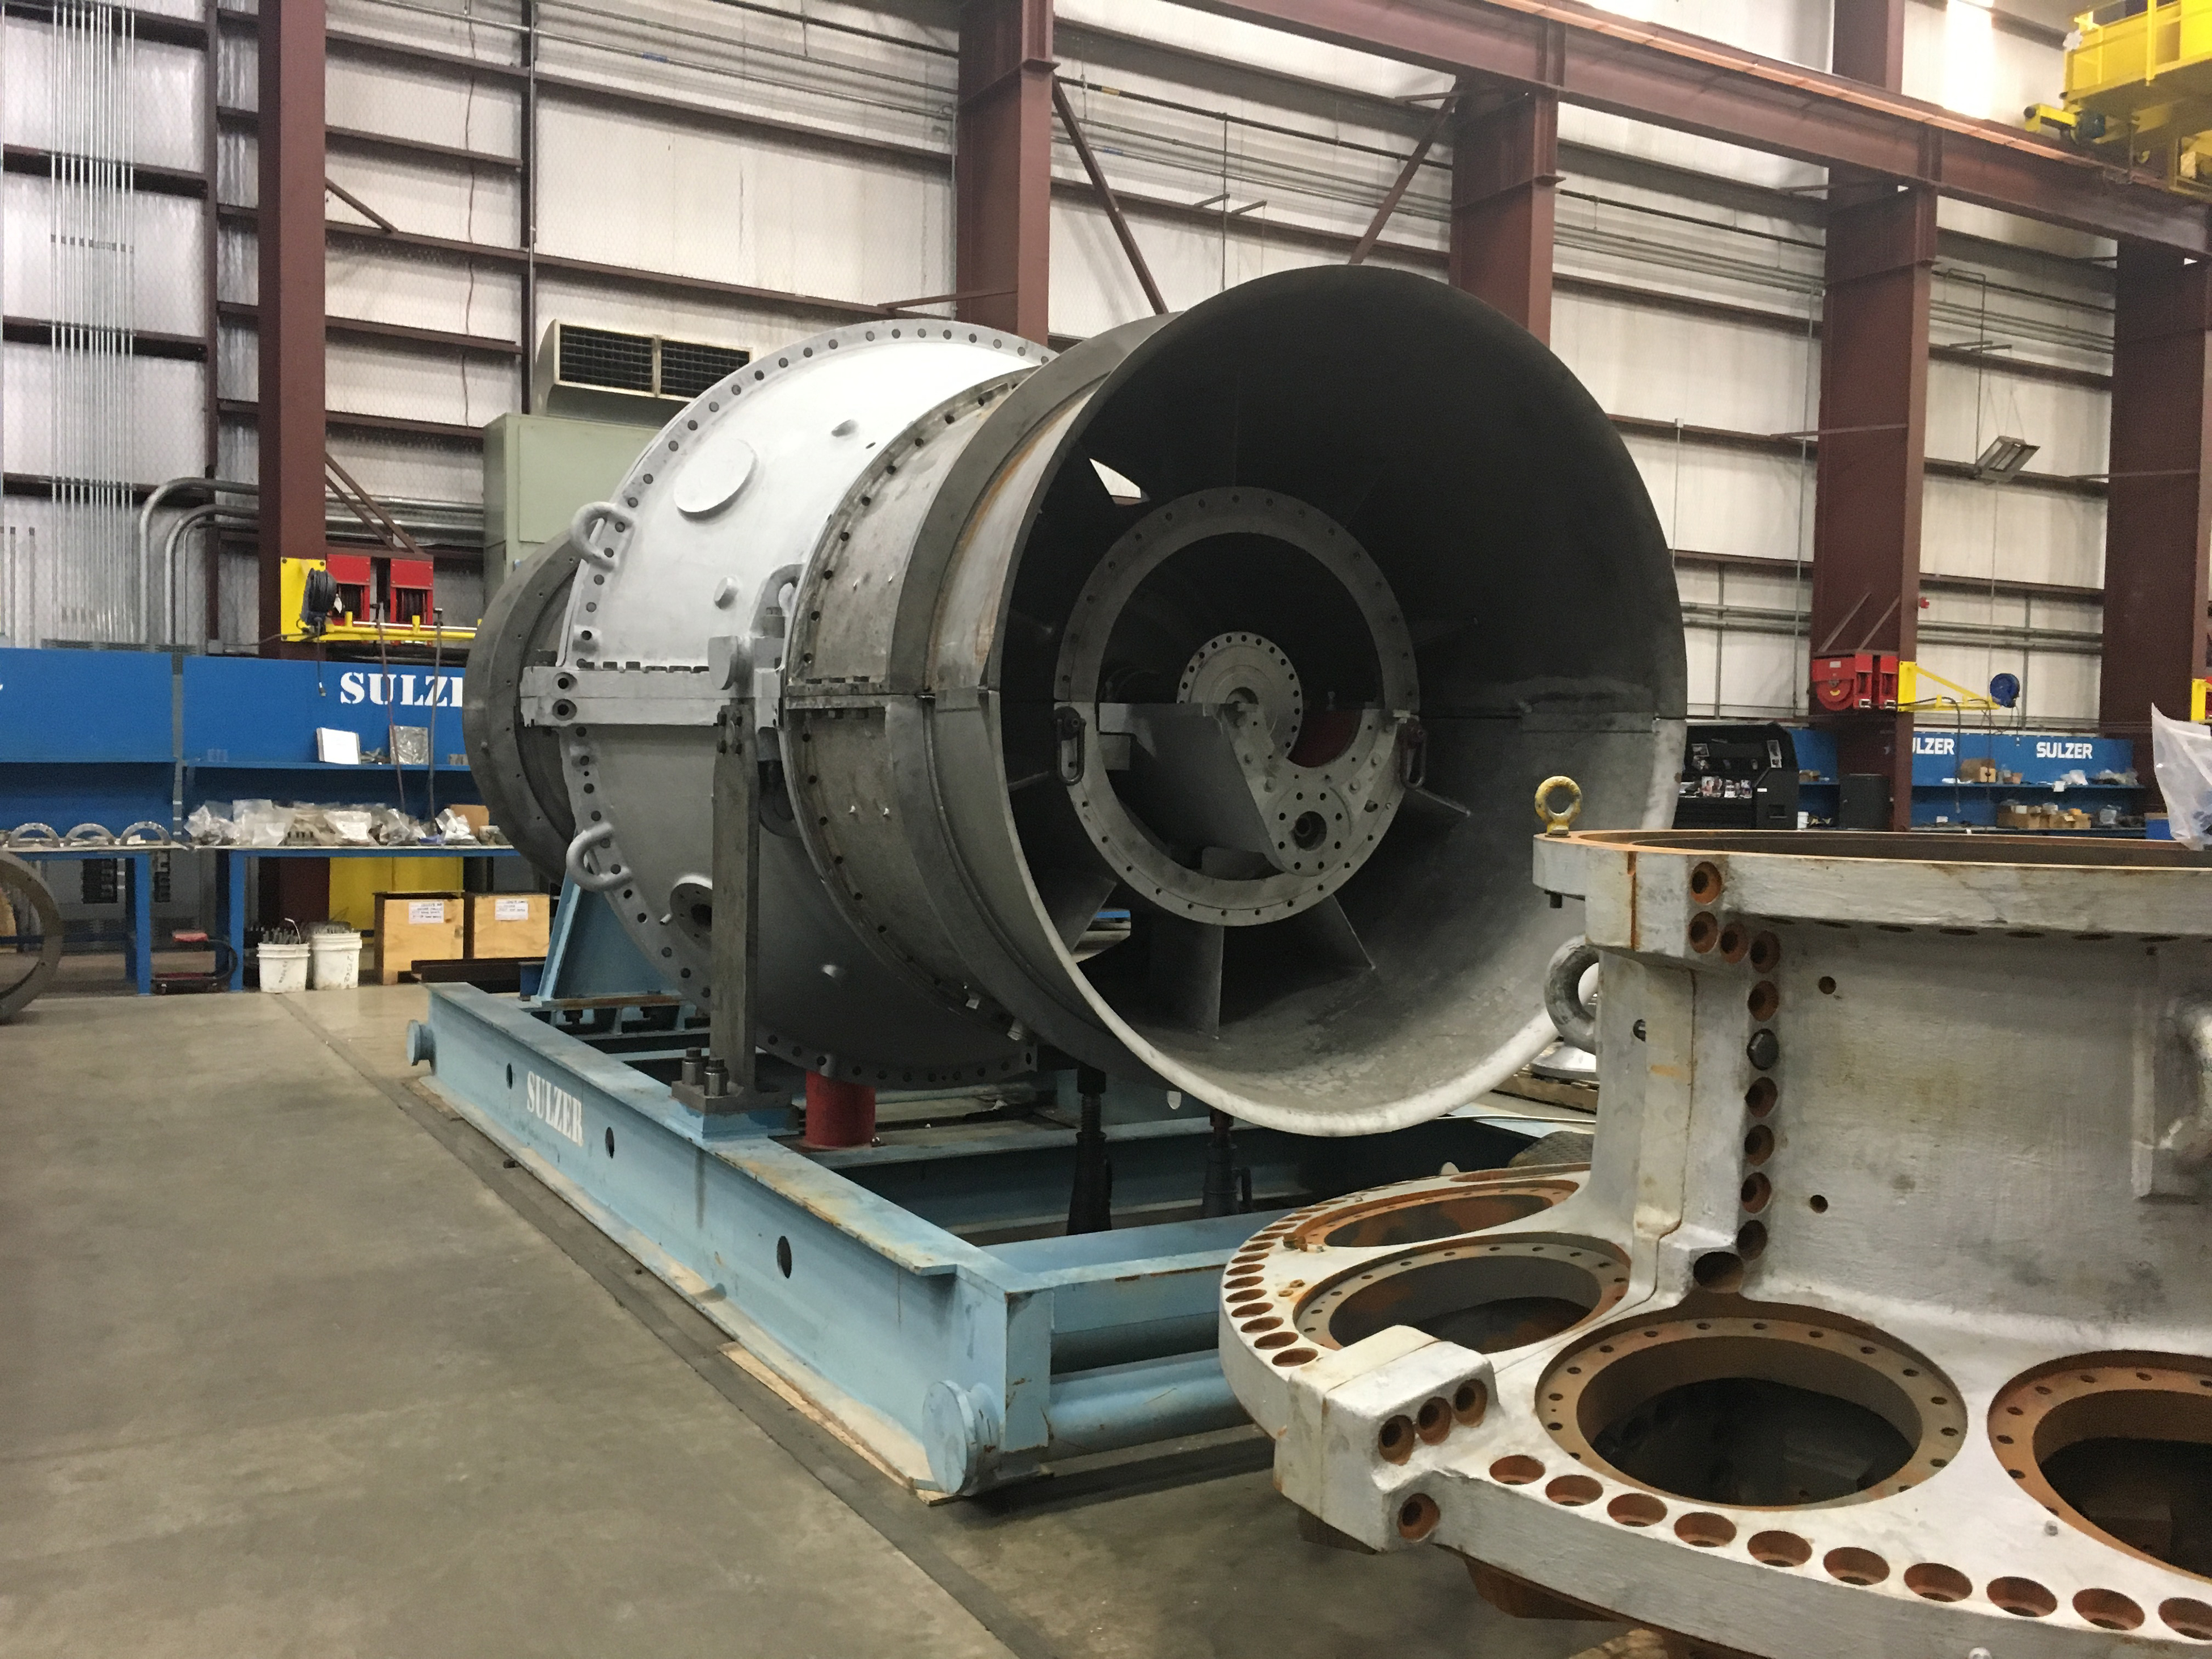 Large industrial gas turbines require spacious and well-equipped service centers